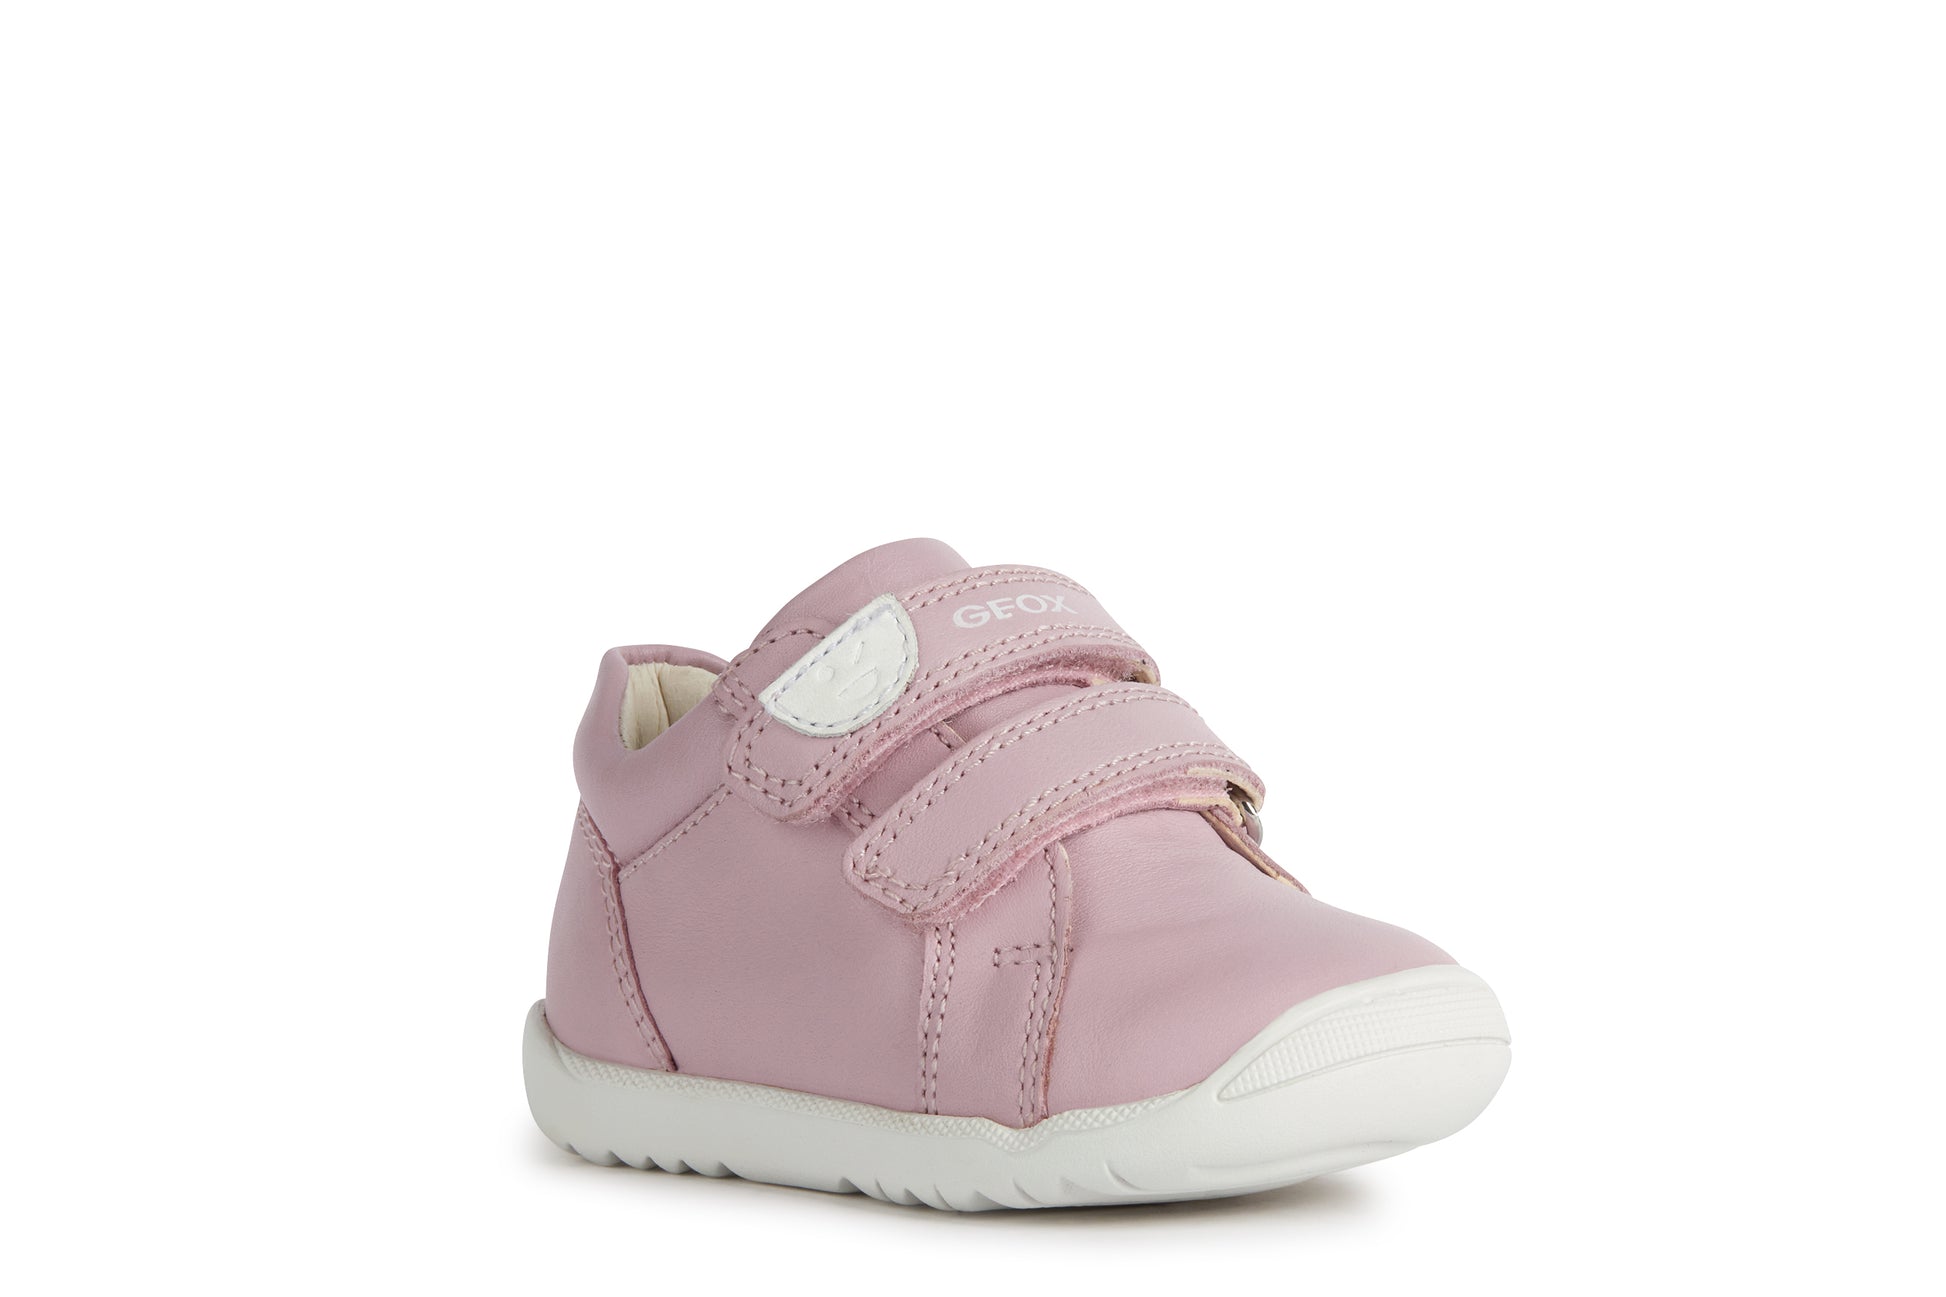 A girls shoe by Geox, style B Macchia, in pink leather with white trim and double velcro fastening. Angled view of right side.